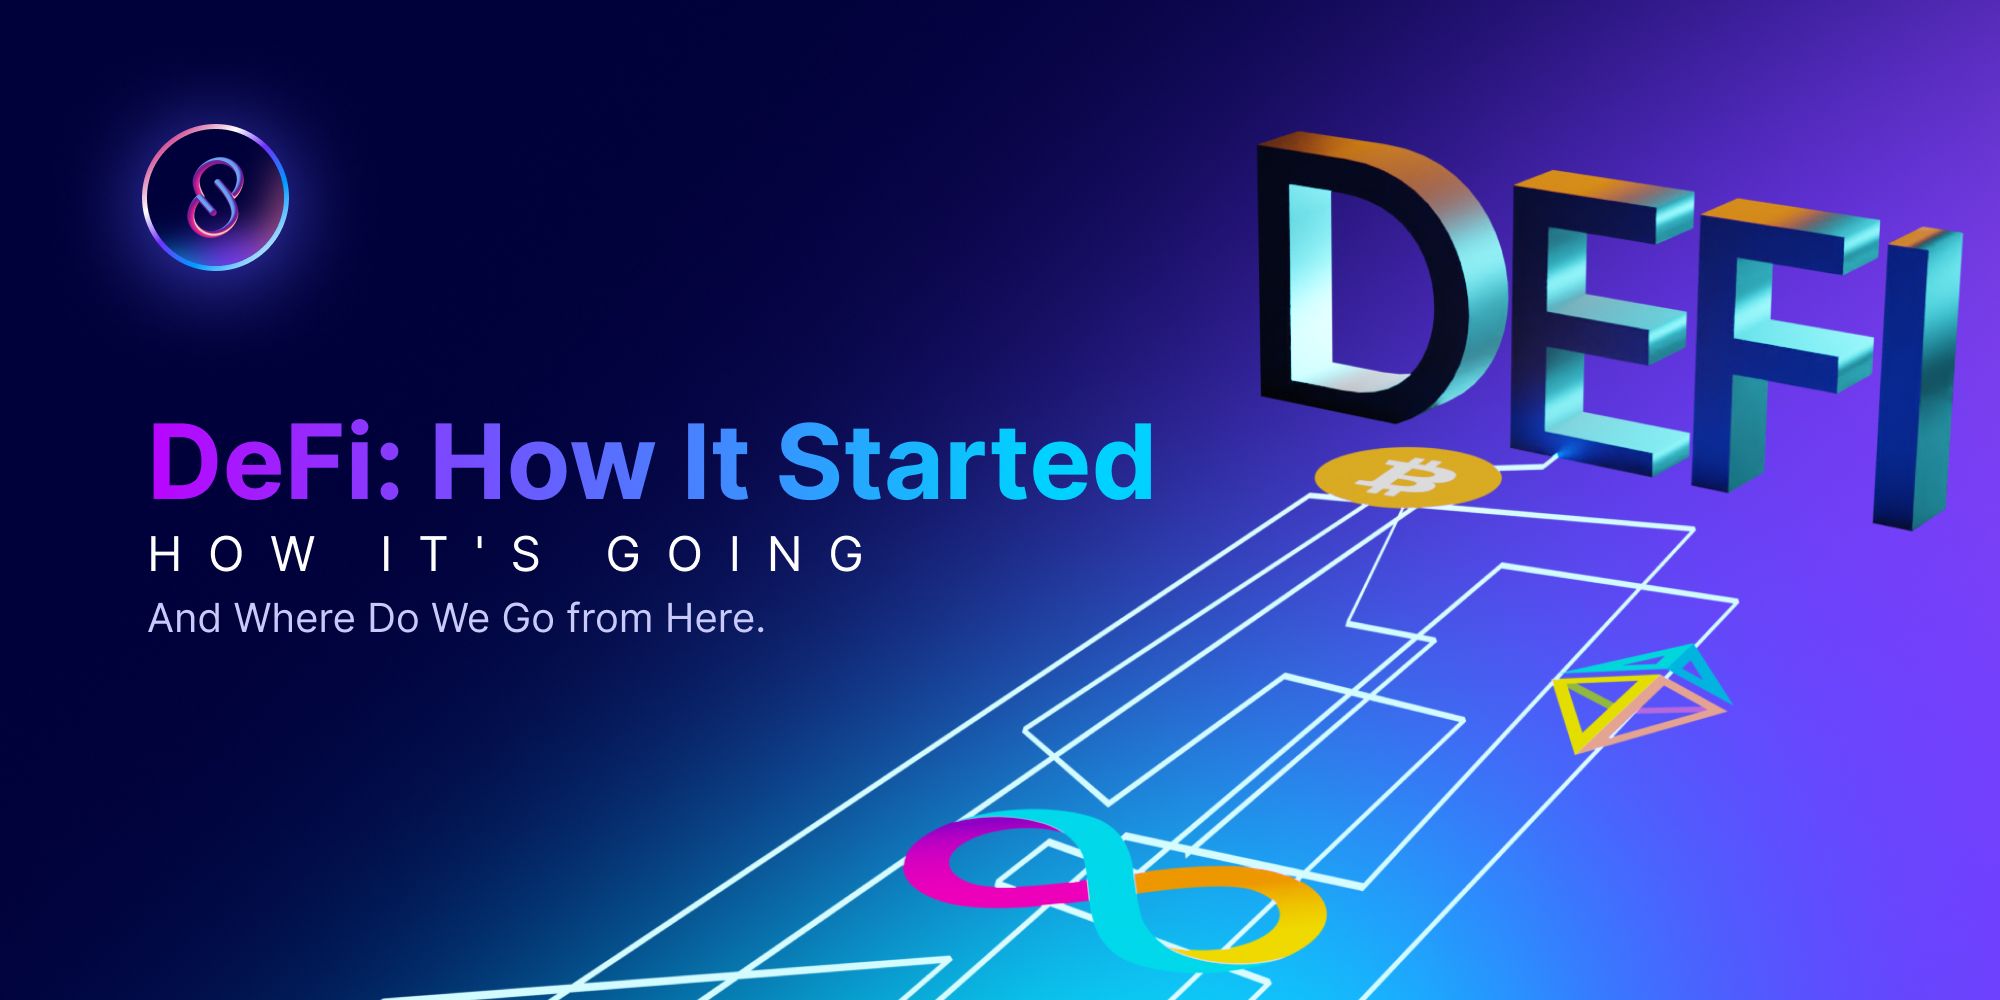 DeFi: How It Started. How It's Going. And Where Do We Go from Here